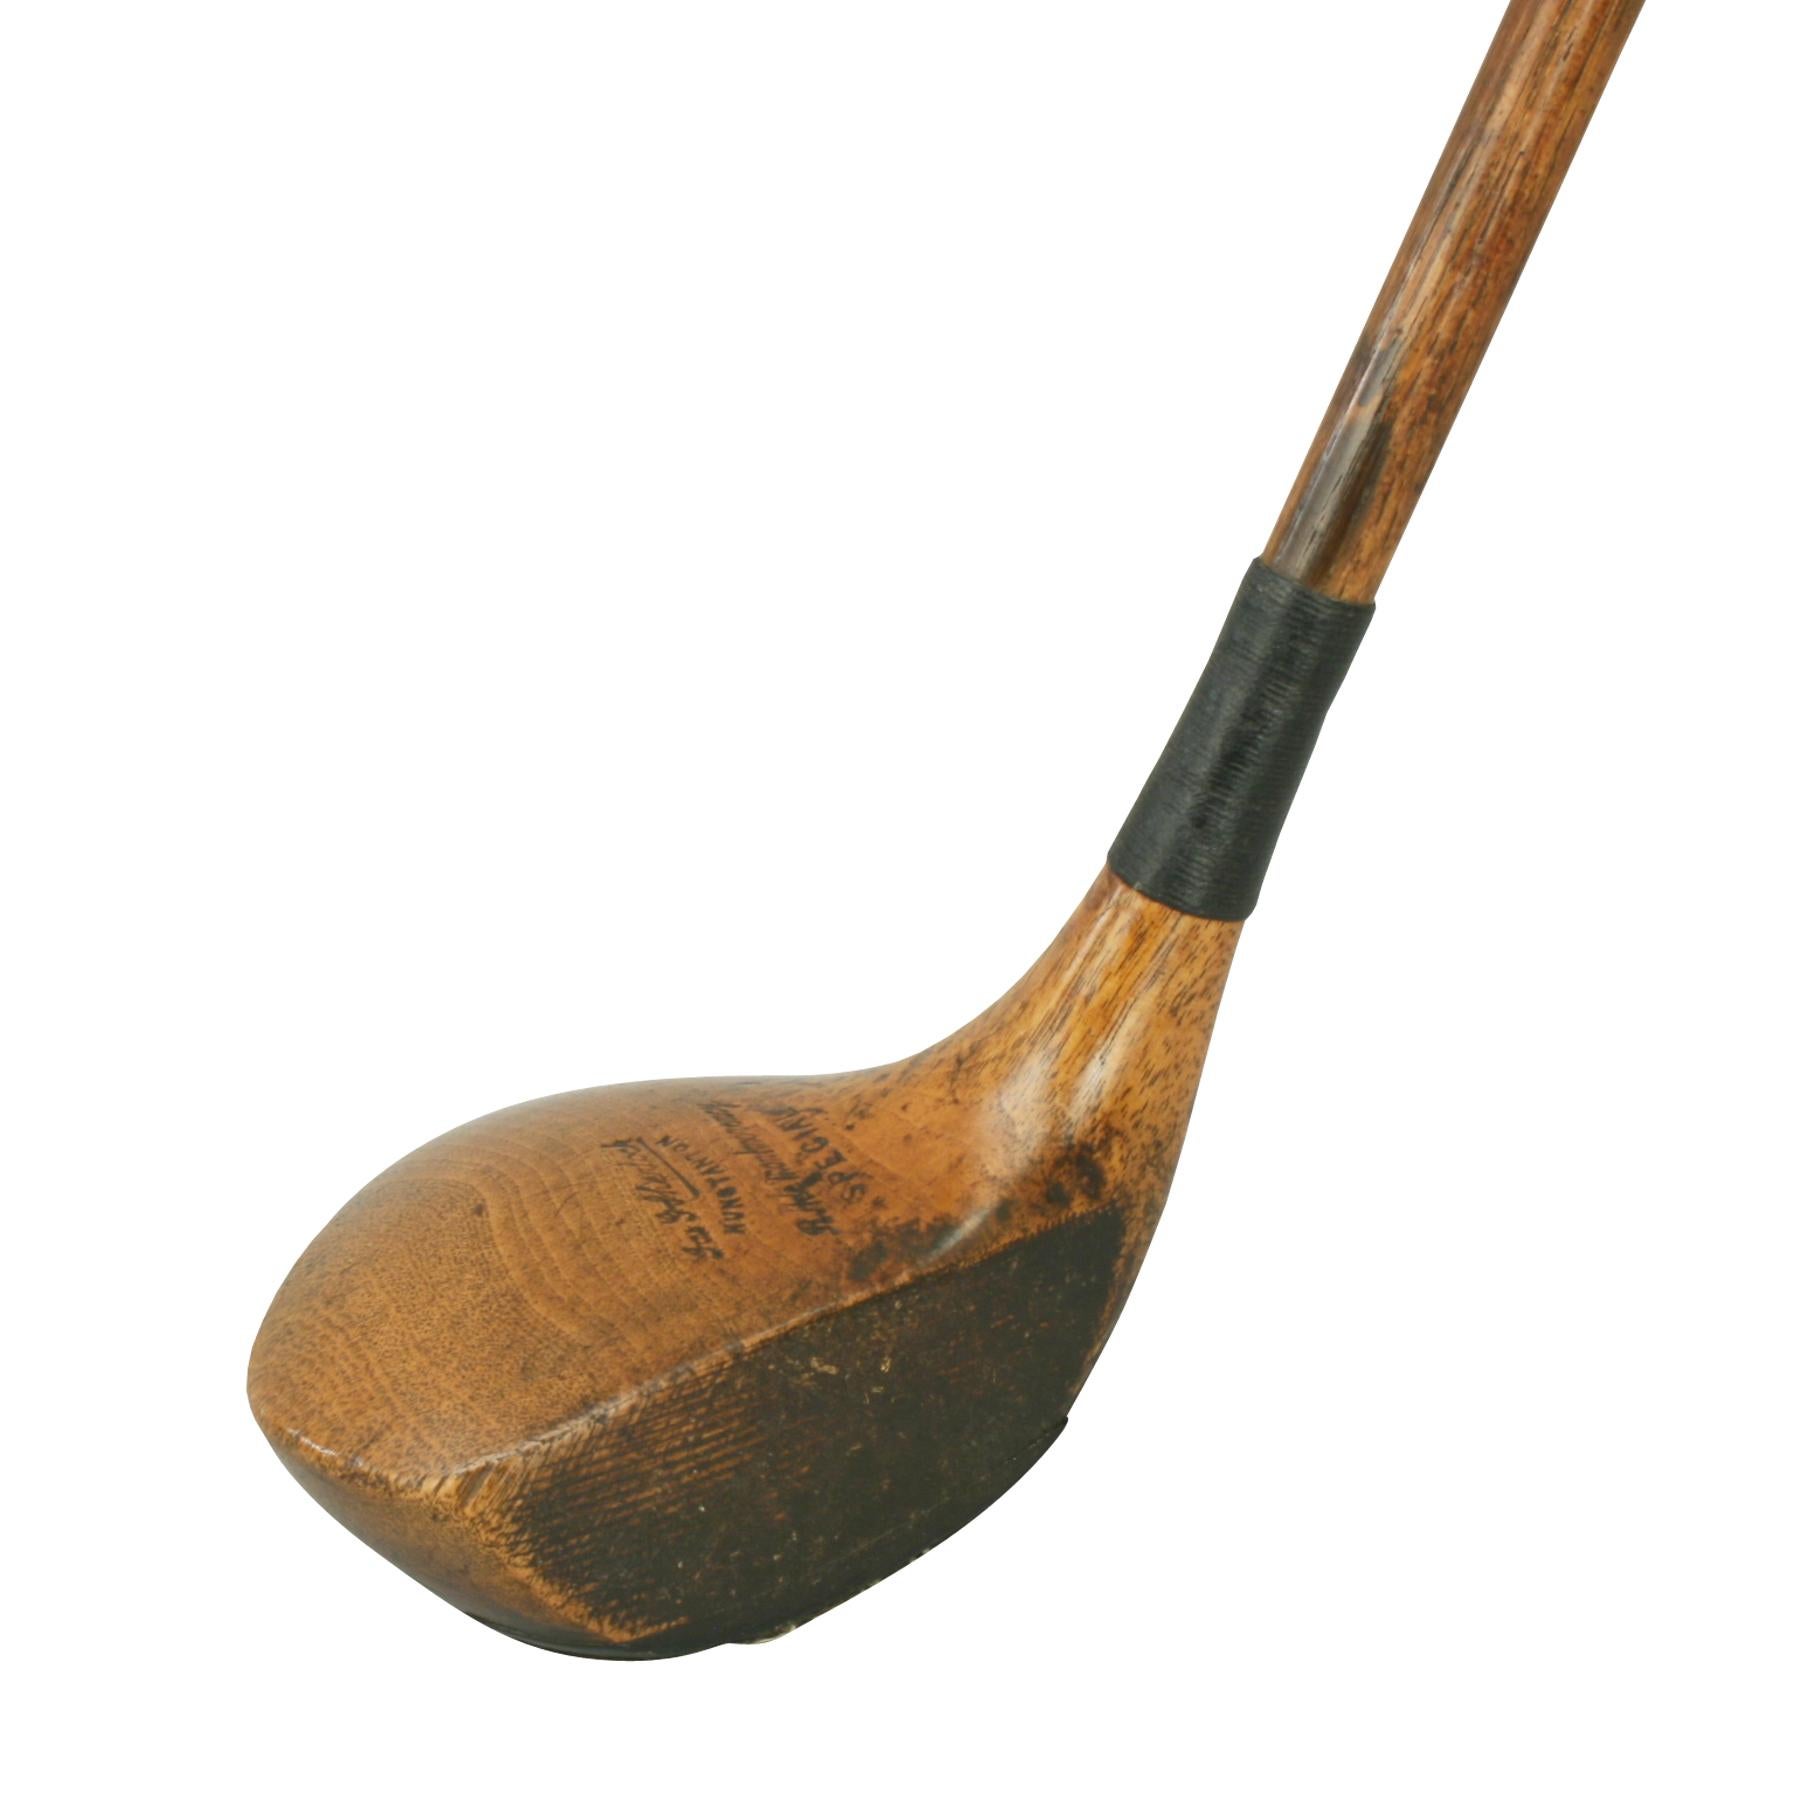 A beautiful socket head persimmon wood golf club, driver with hickory shaft. The club head is with partial brass sole plate and lead weight to the rear. The club head is stamped 'Jas G Sherlock, HUNSTANTON, RHde Montmorency, SPECIAL'. The neck of